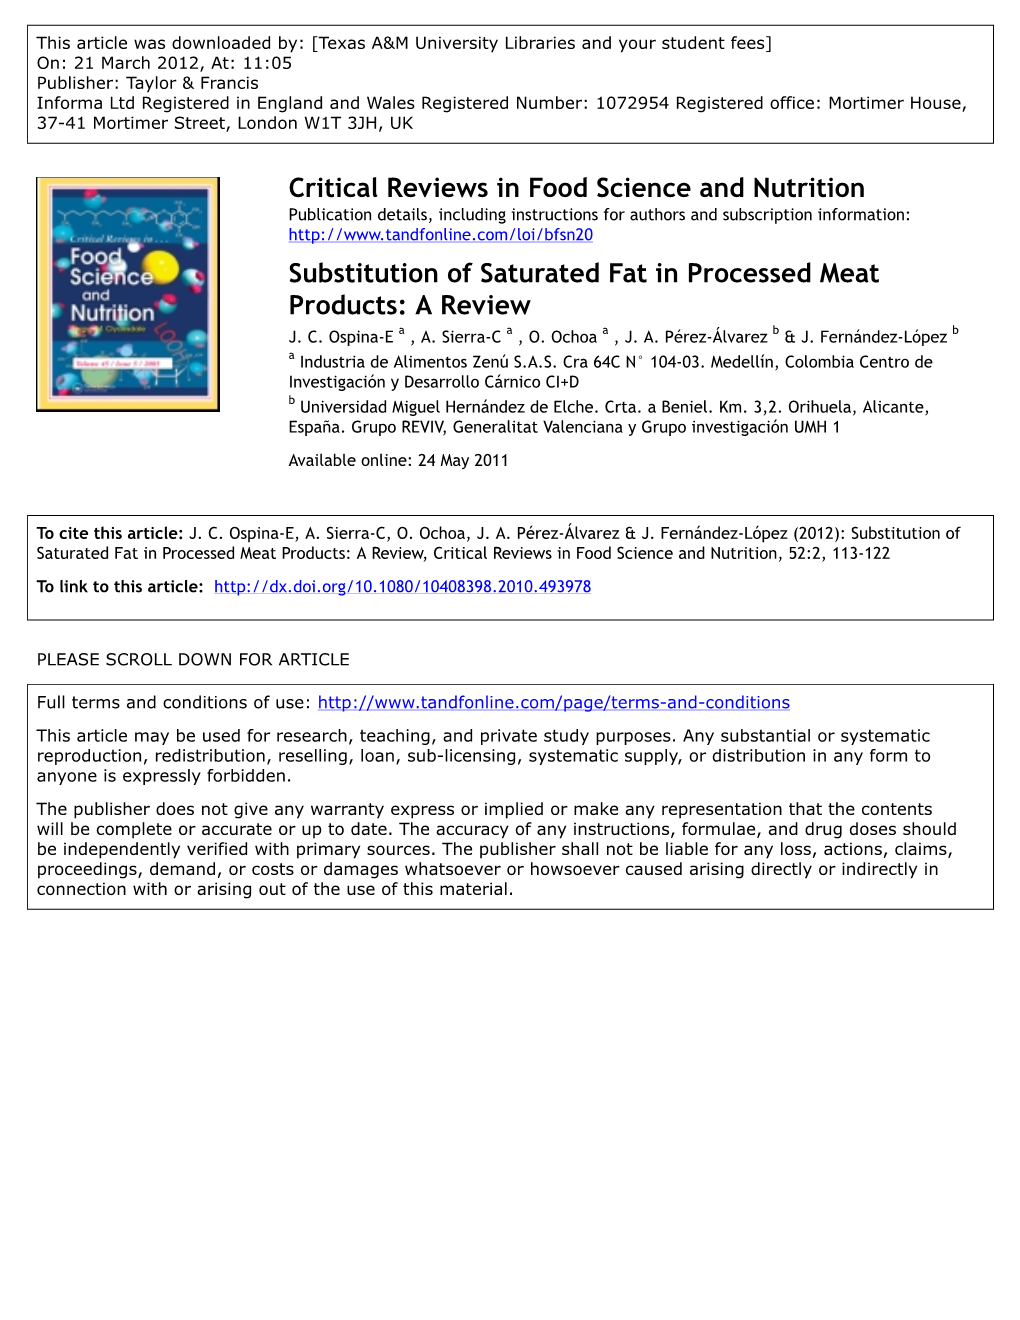 Substitution of Saturated Fat in Processed Meat Products: a Review J